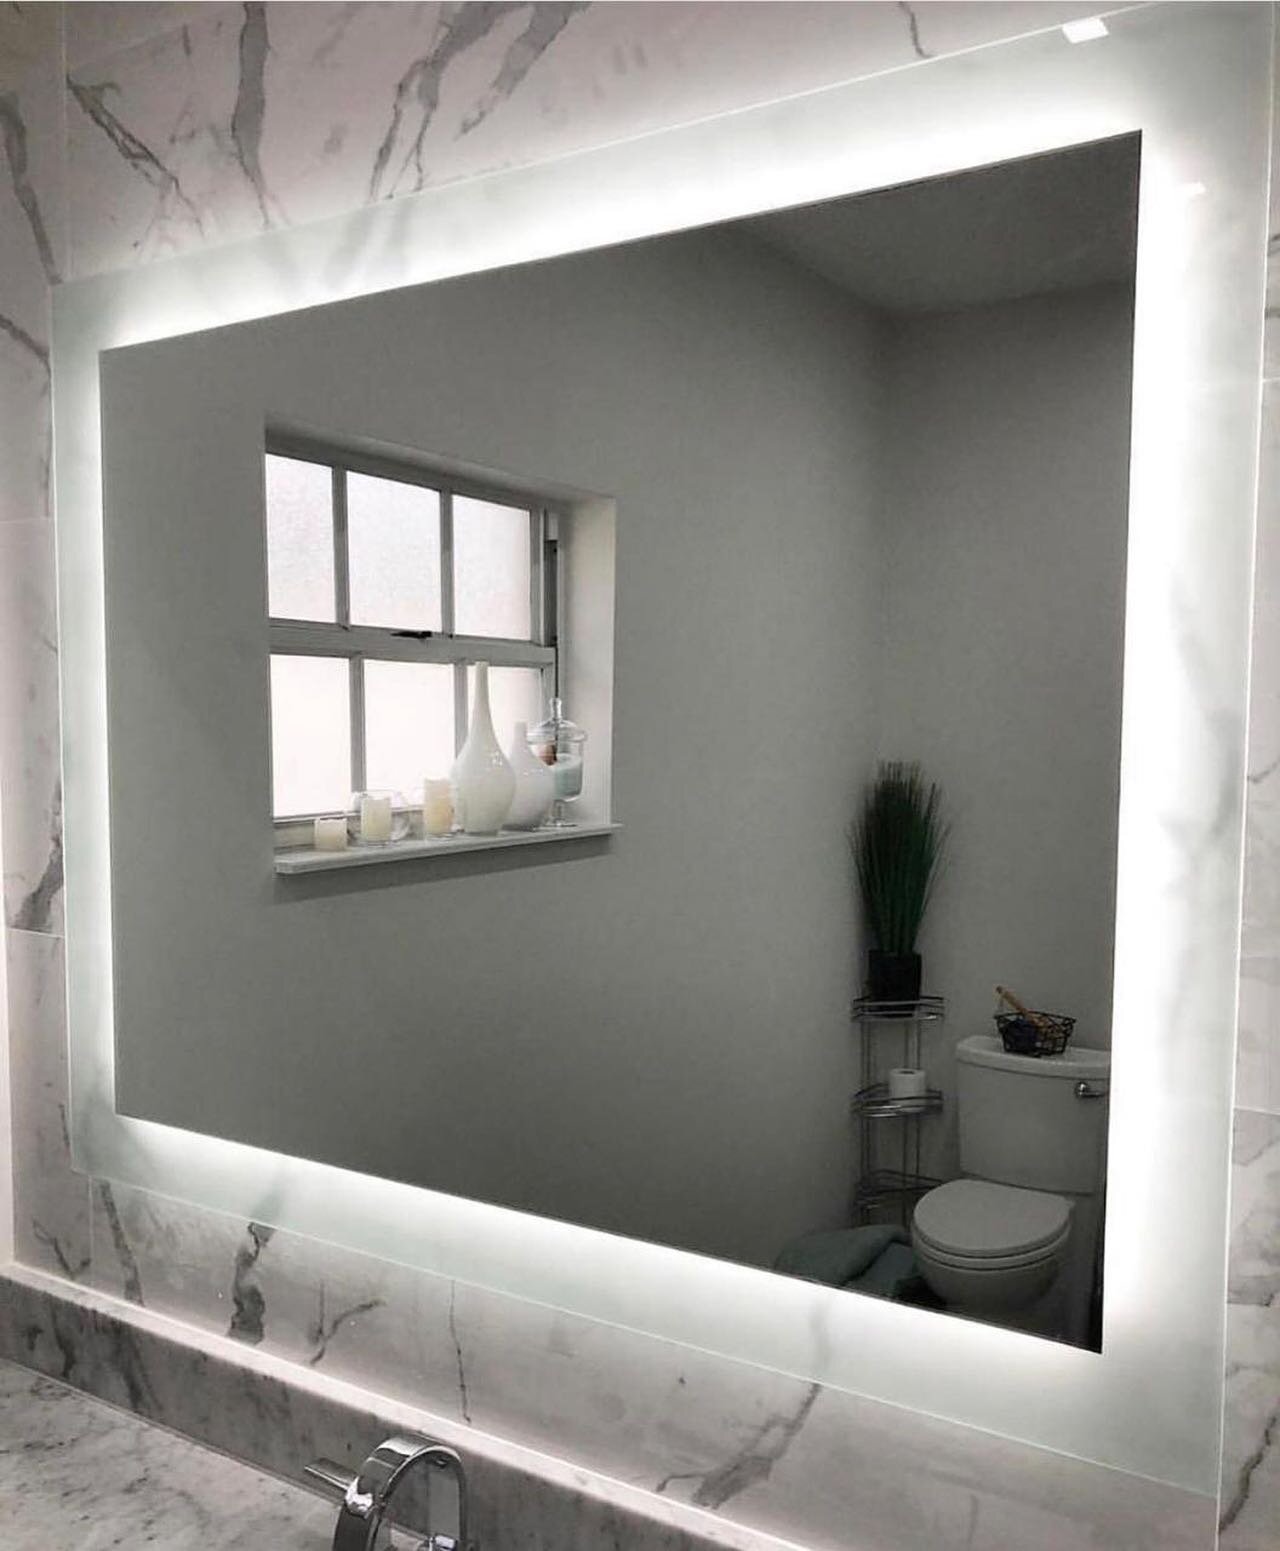 Who doesn&rsquo;t like great lighting? Our lit mirrors are a perfect addition for your space✨

Bathroom by: @oceanhomeltd 

#ActiveStyle
#activehomecentre
#moresavingsmorechoices
#mirrors